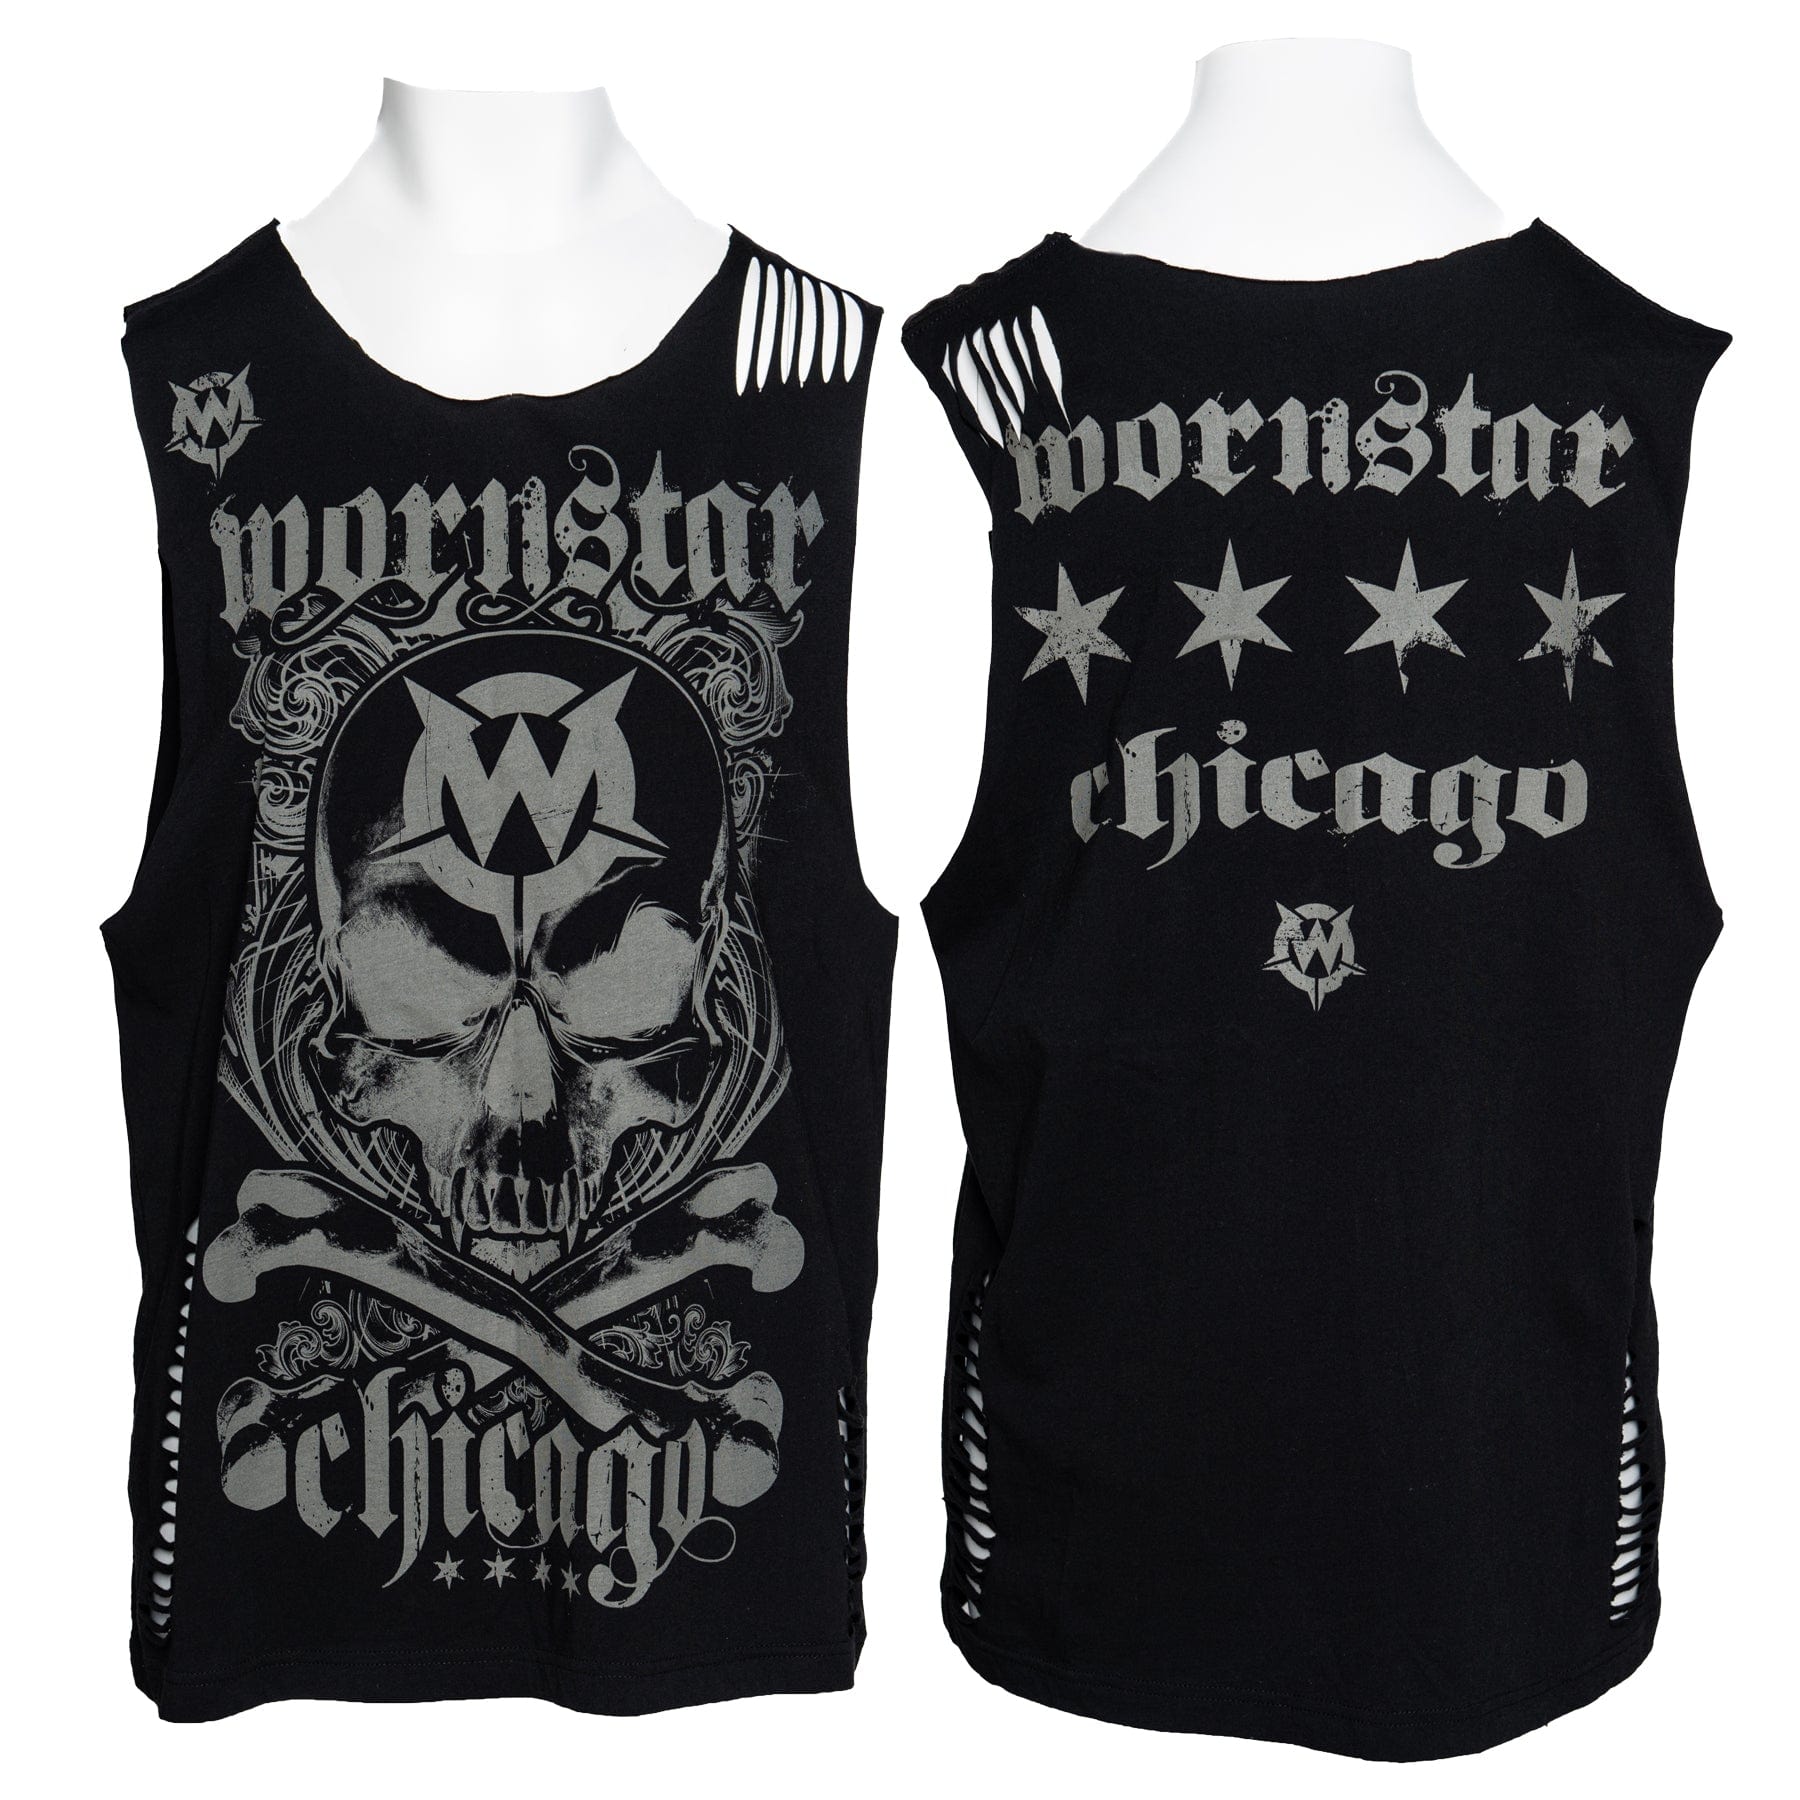 Sirens Collection T-Shirt One Size Wornstar Custom -  Cut Tee - Chicago Core OS Ready to Ship